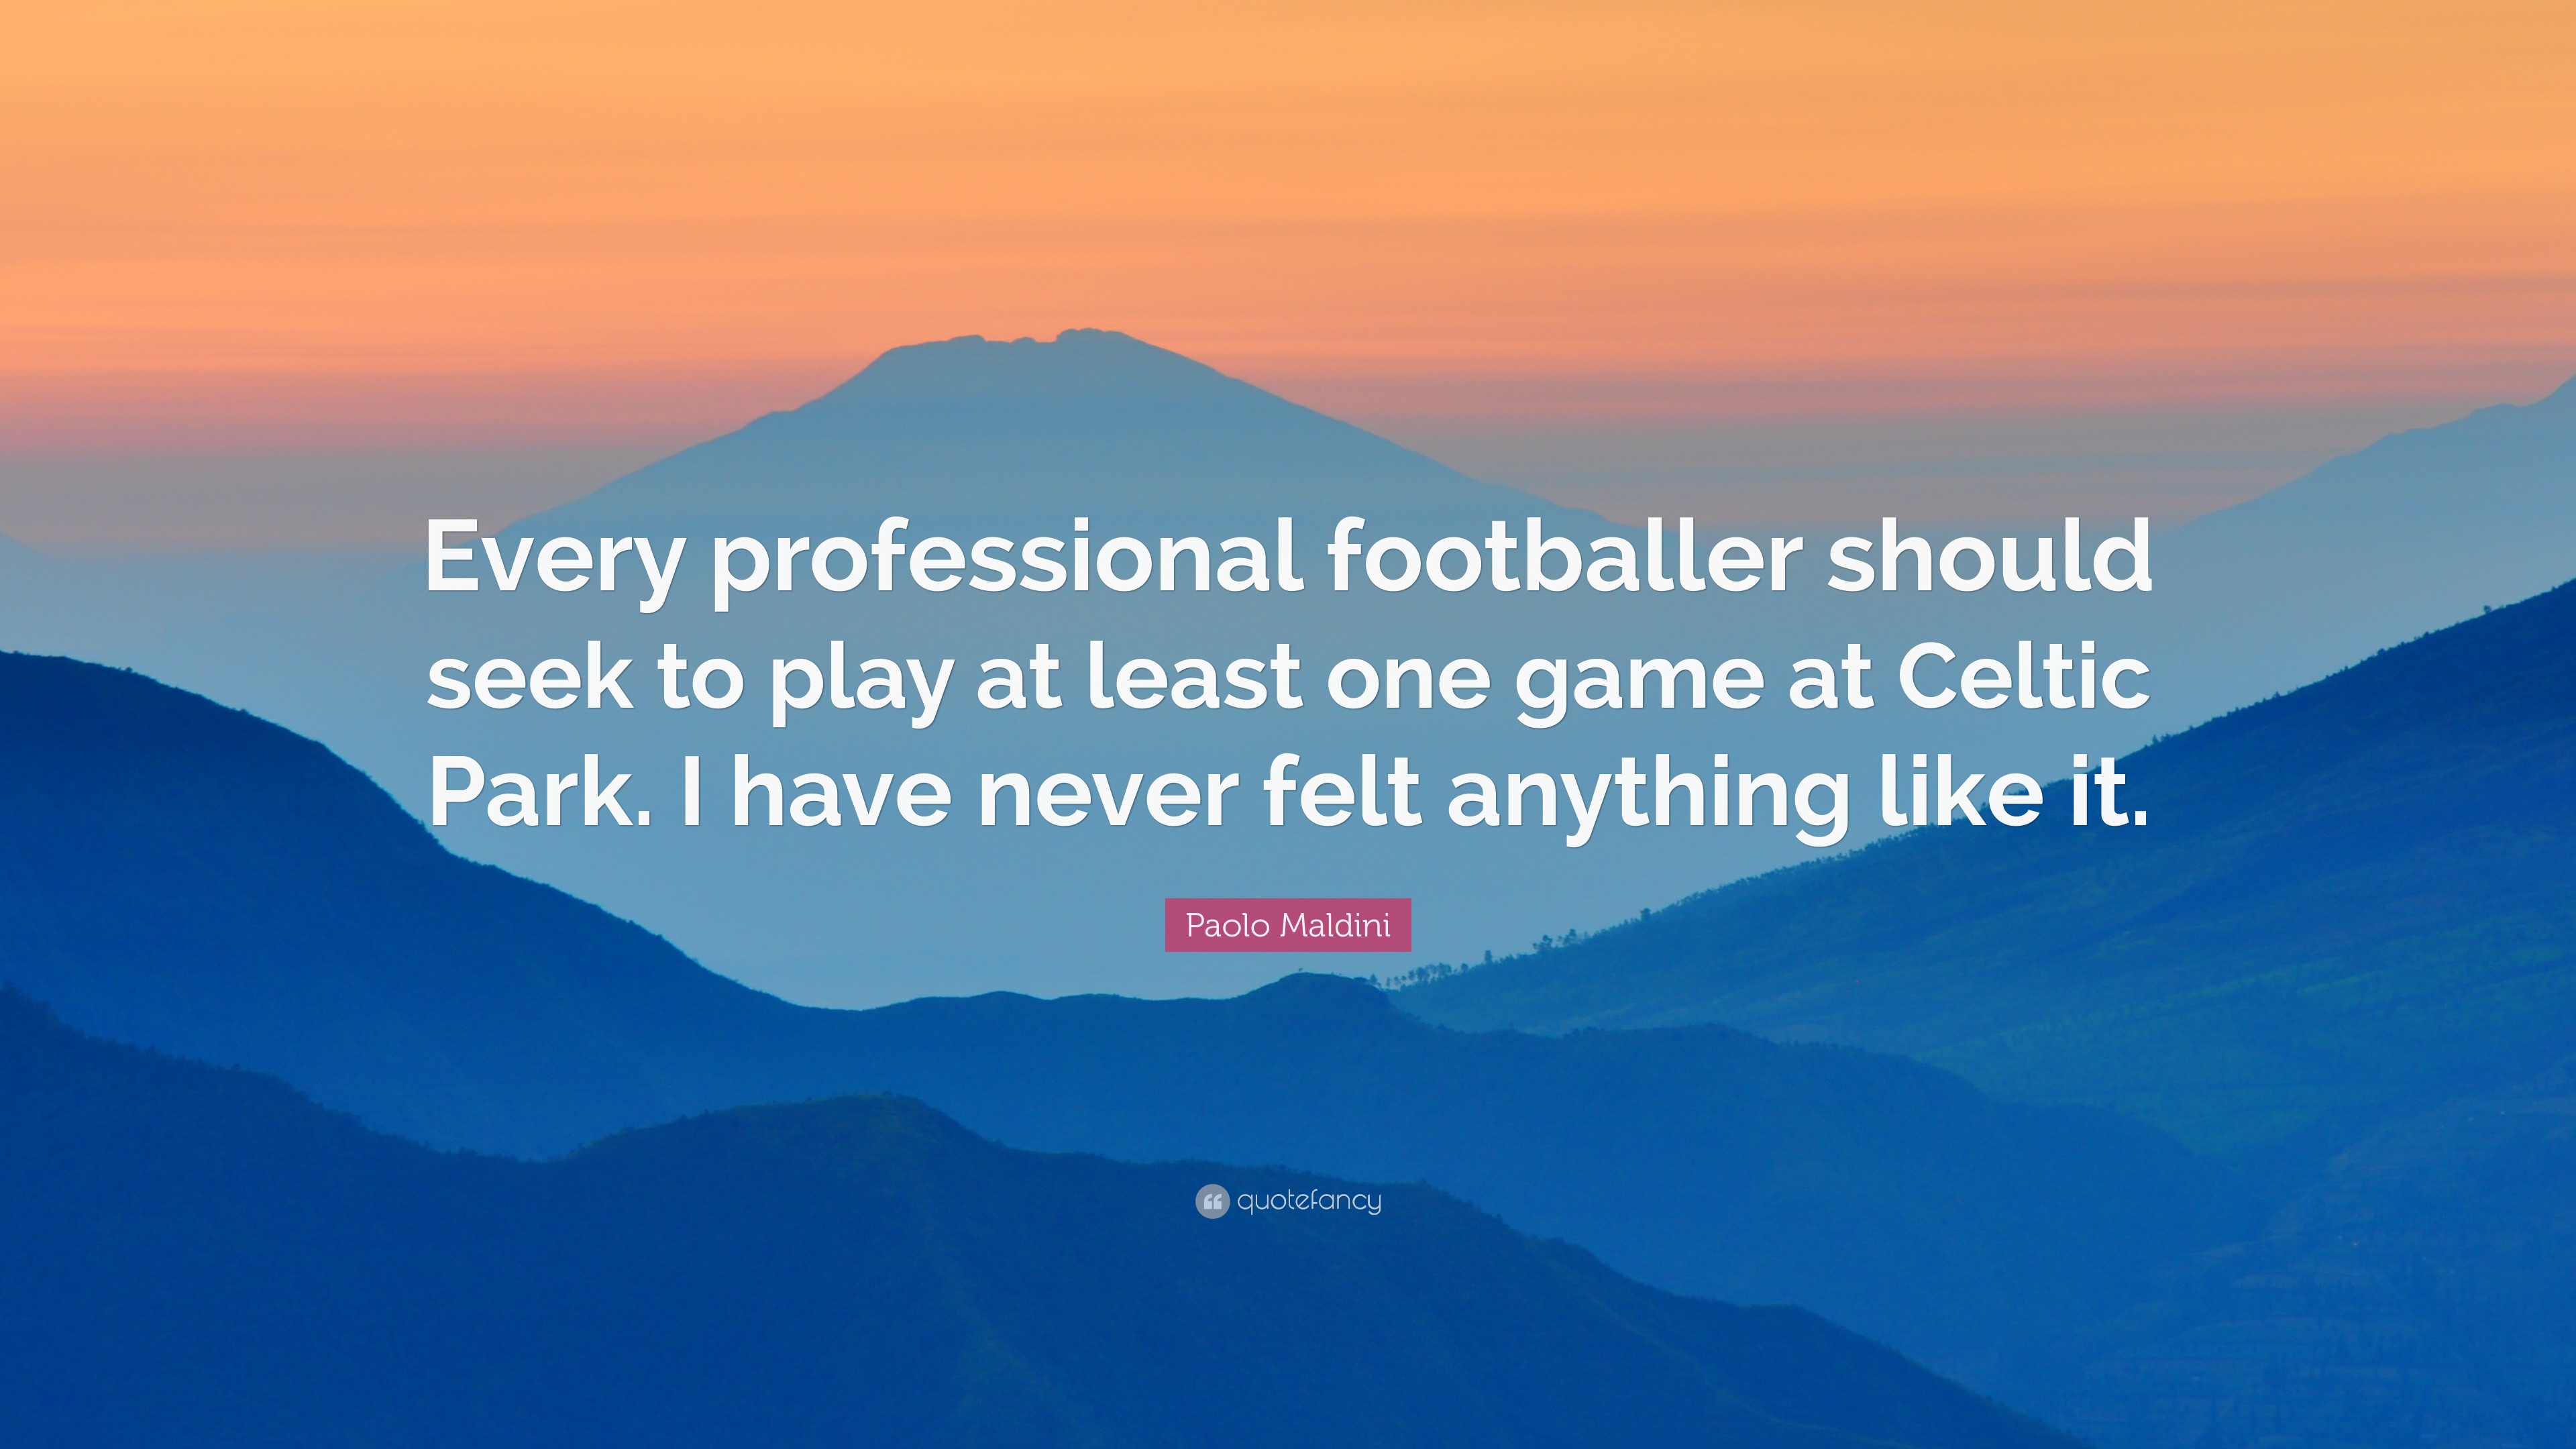 Paolo Maldini Quote: “Every professional footballer should seek to